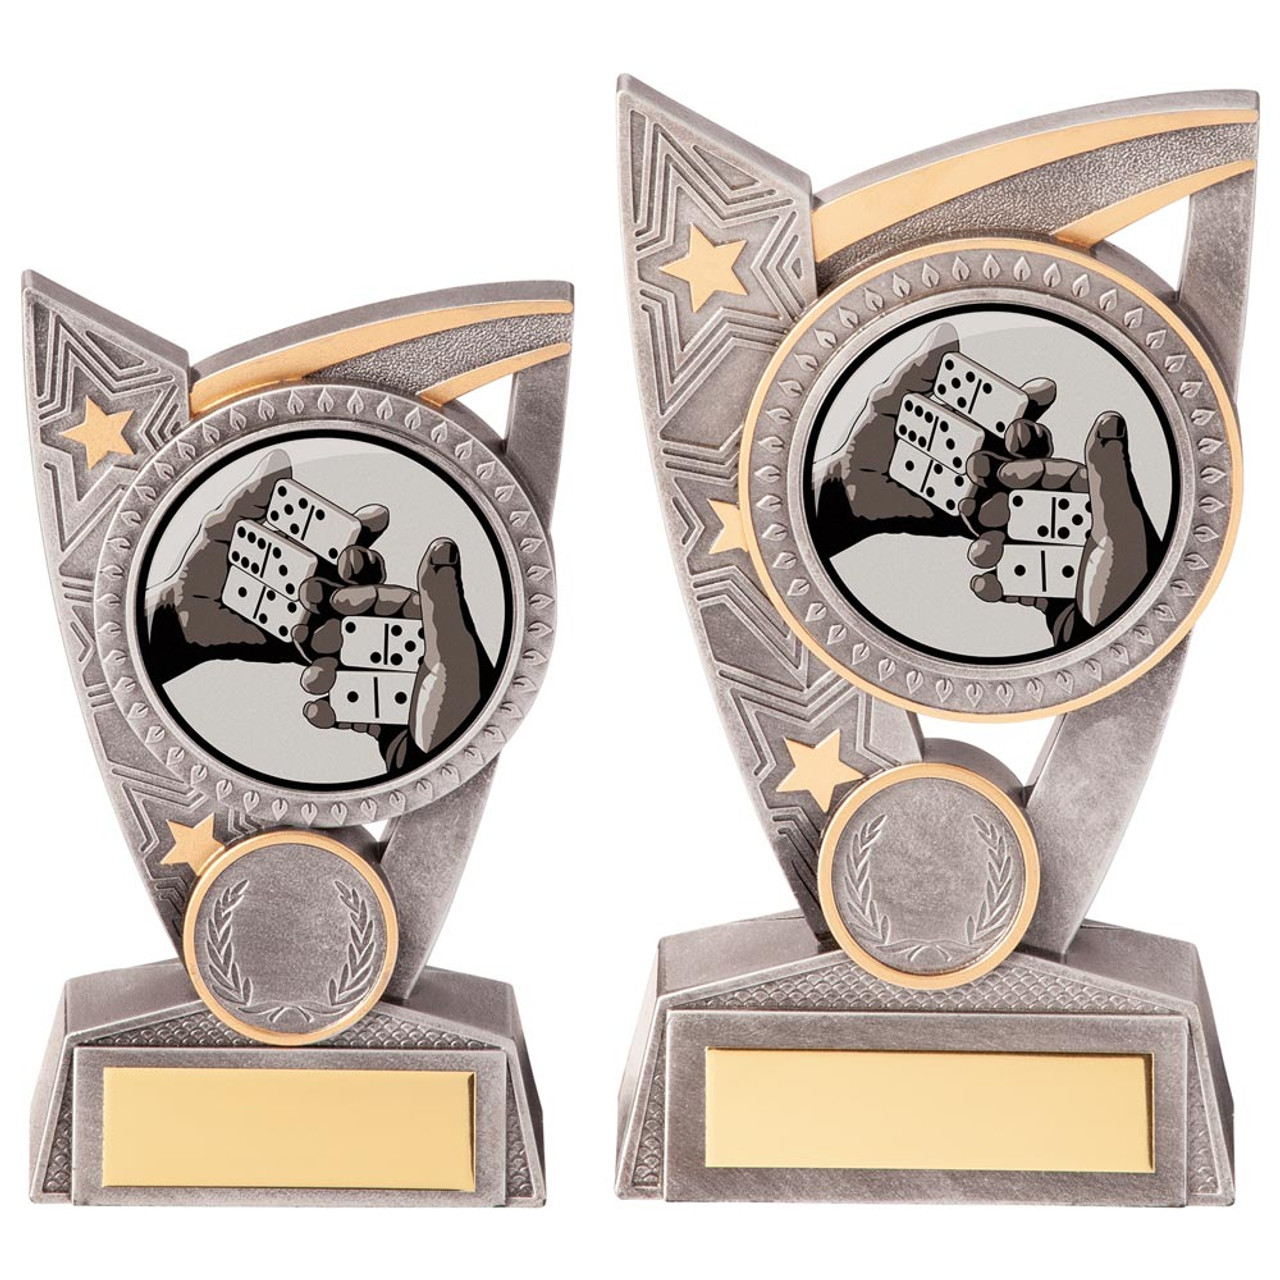 Dominoes Silver & Gold Triumph Award in 2 sizes